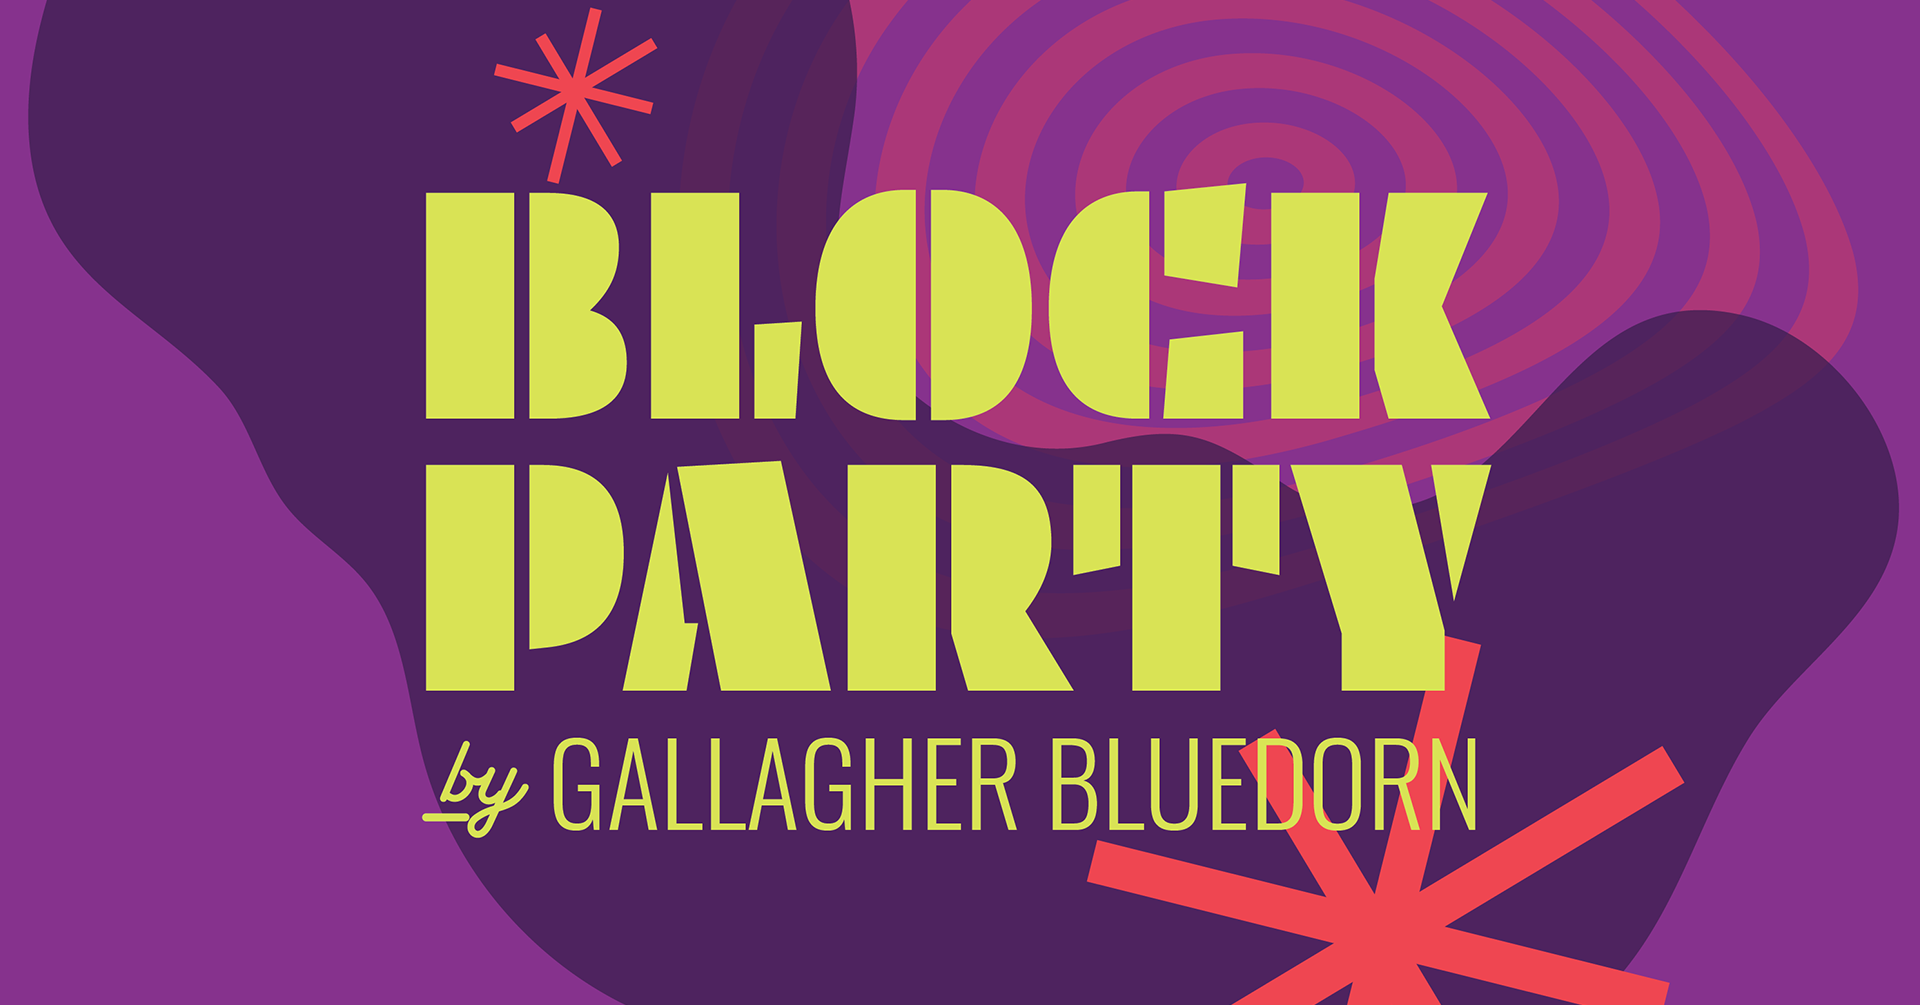 Block Party by Gallagher Bluedorn